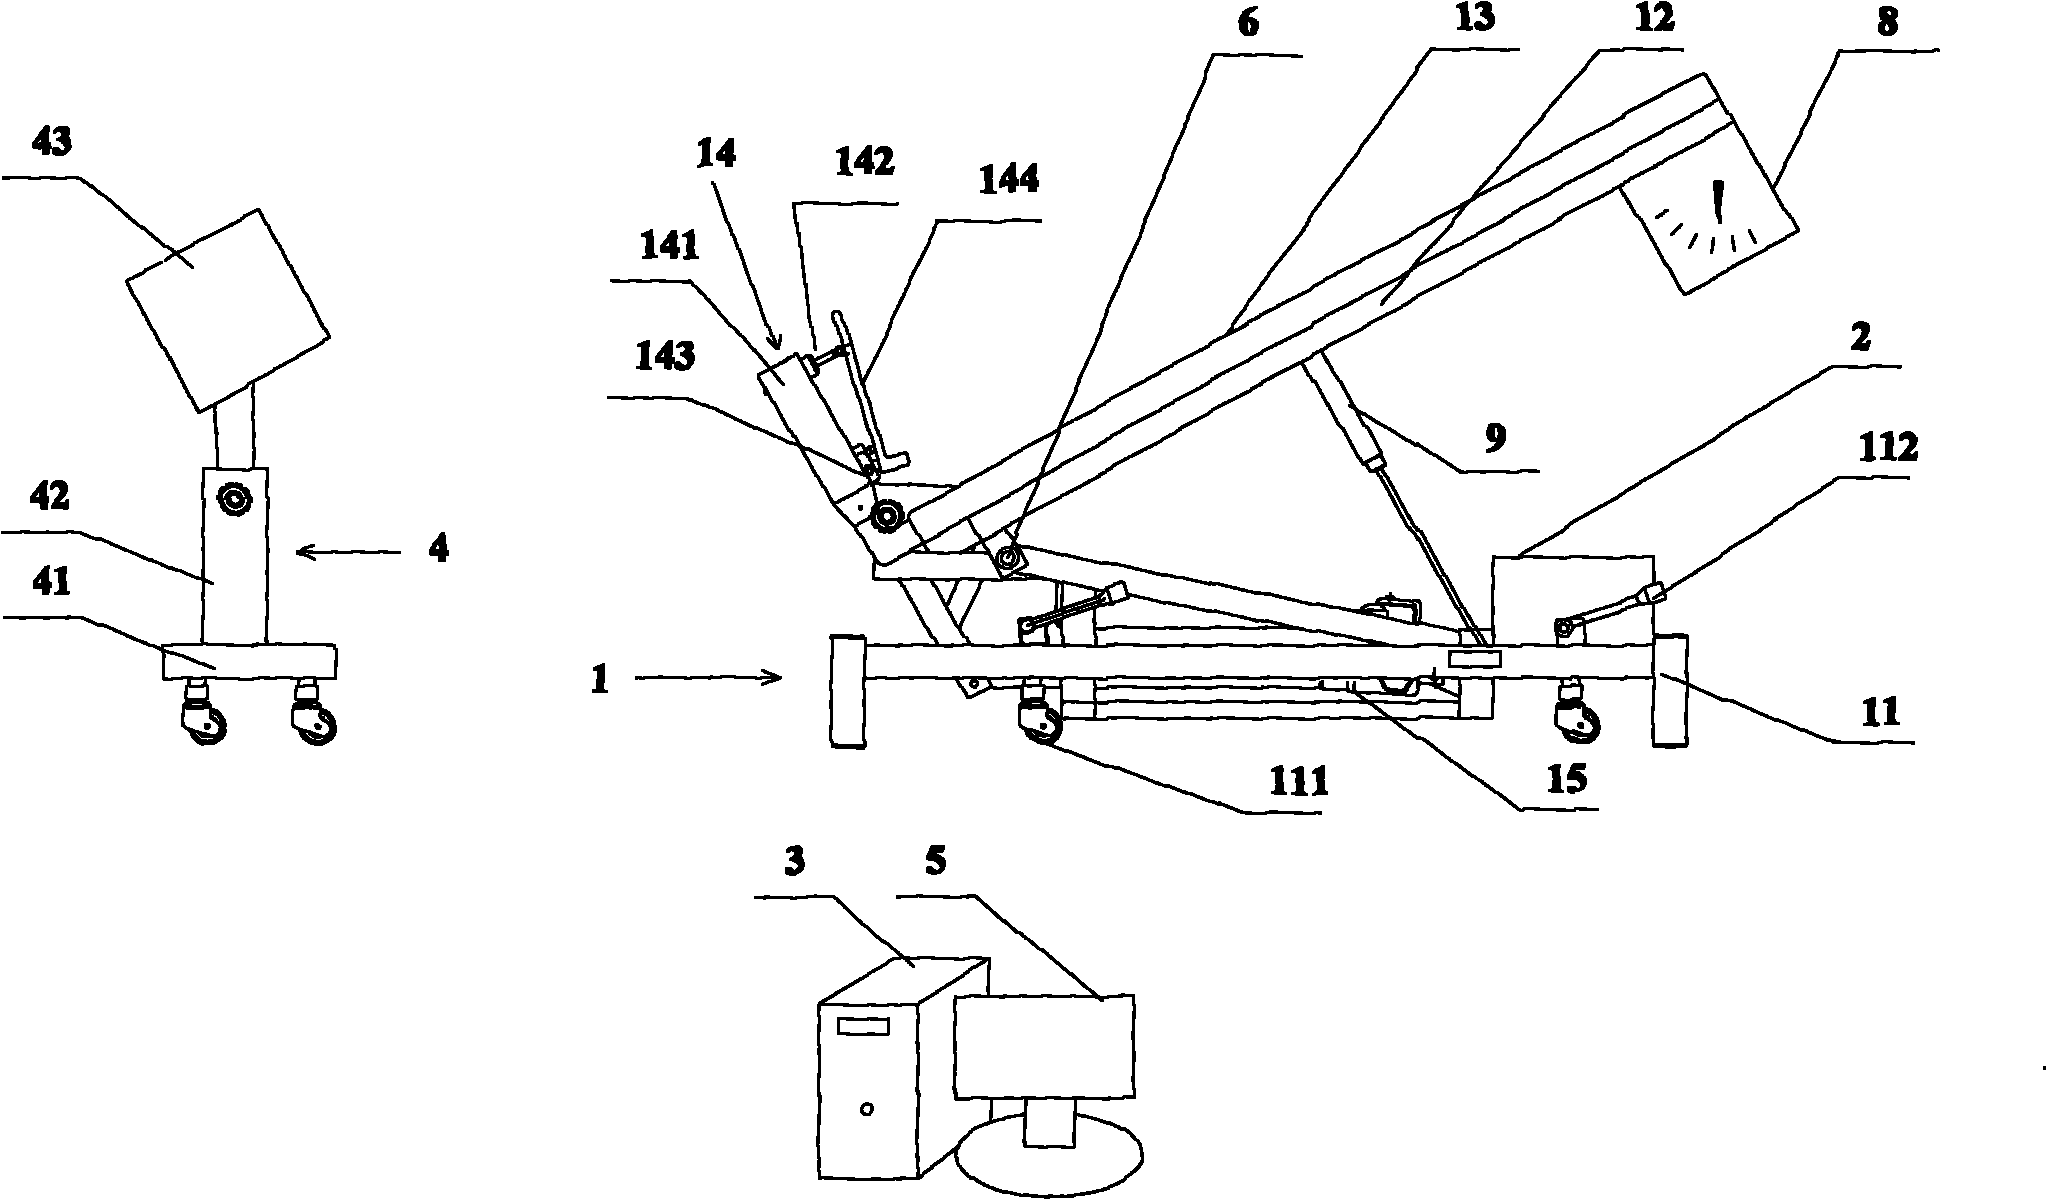 Static balance assessing training method in back-supporting and weight-reducing mode